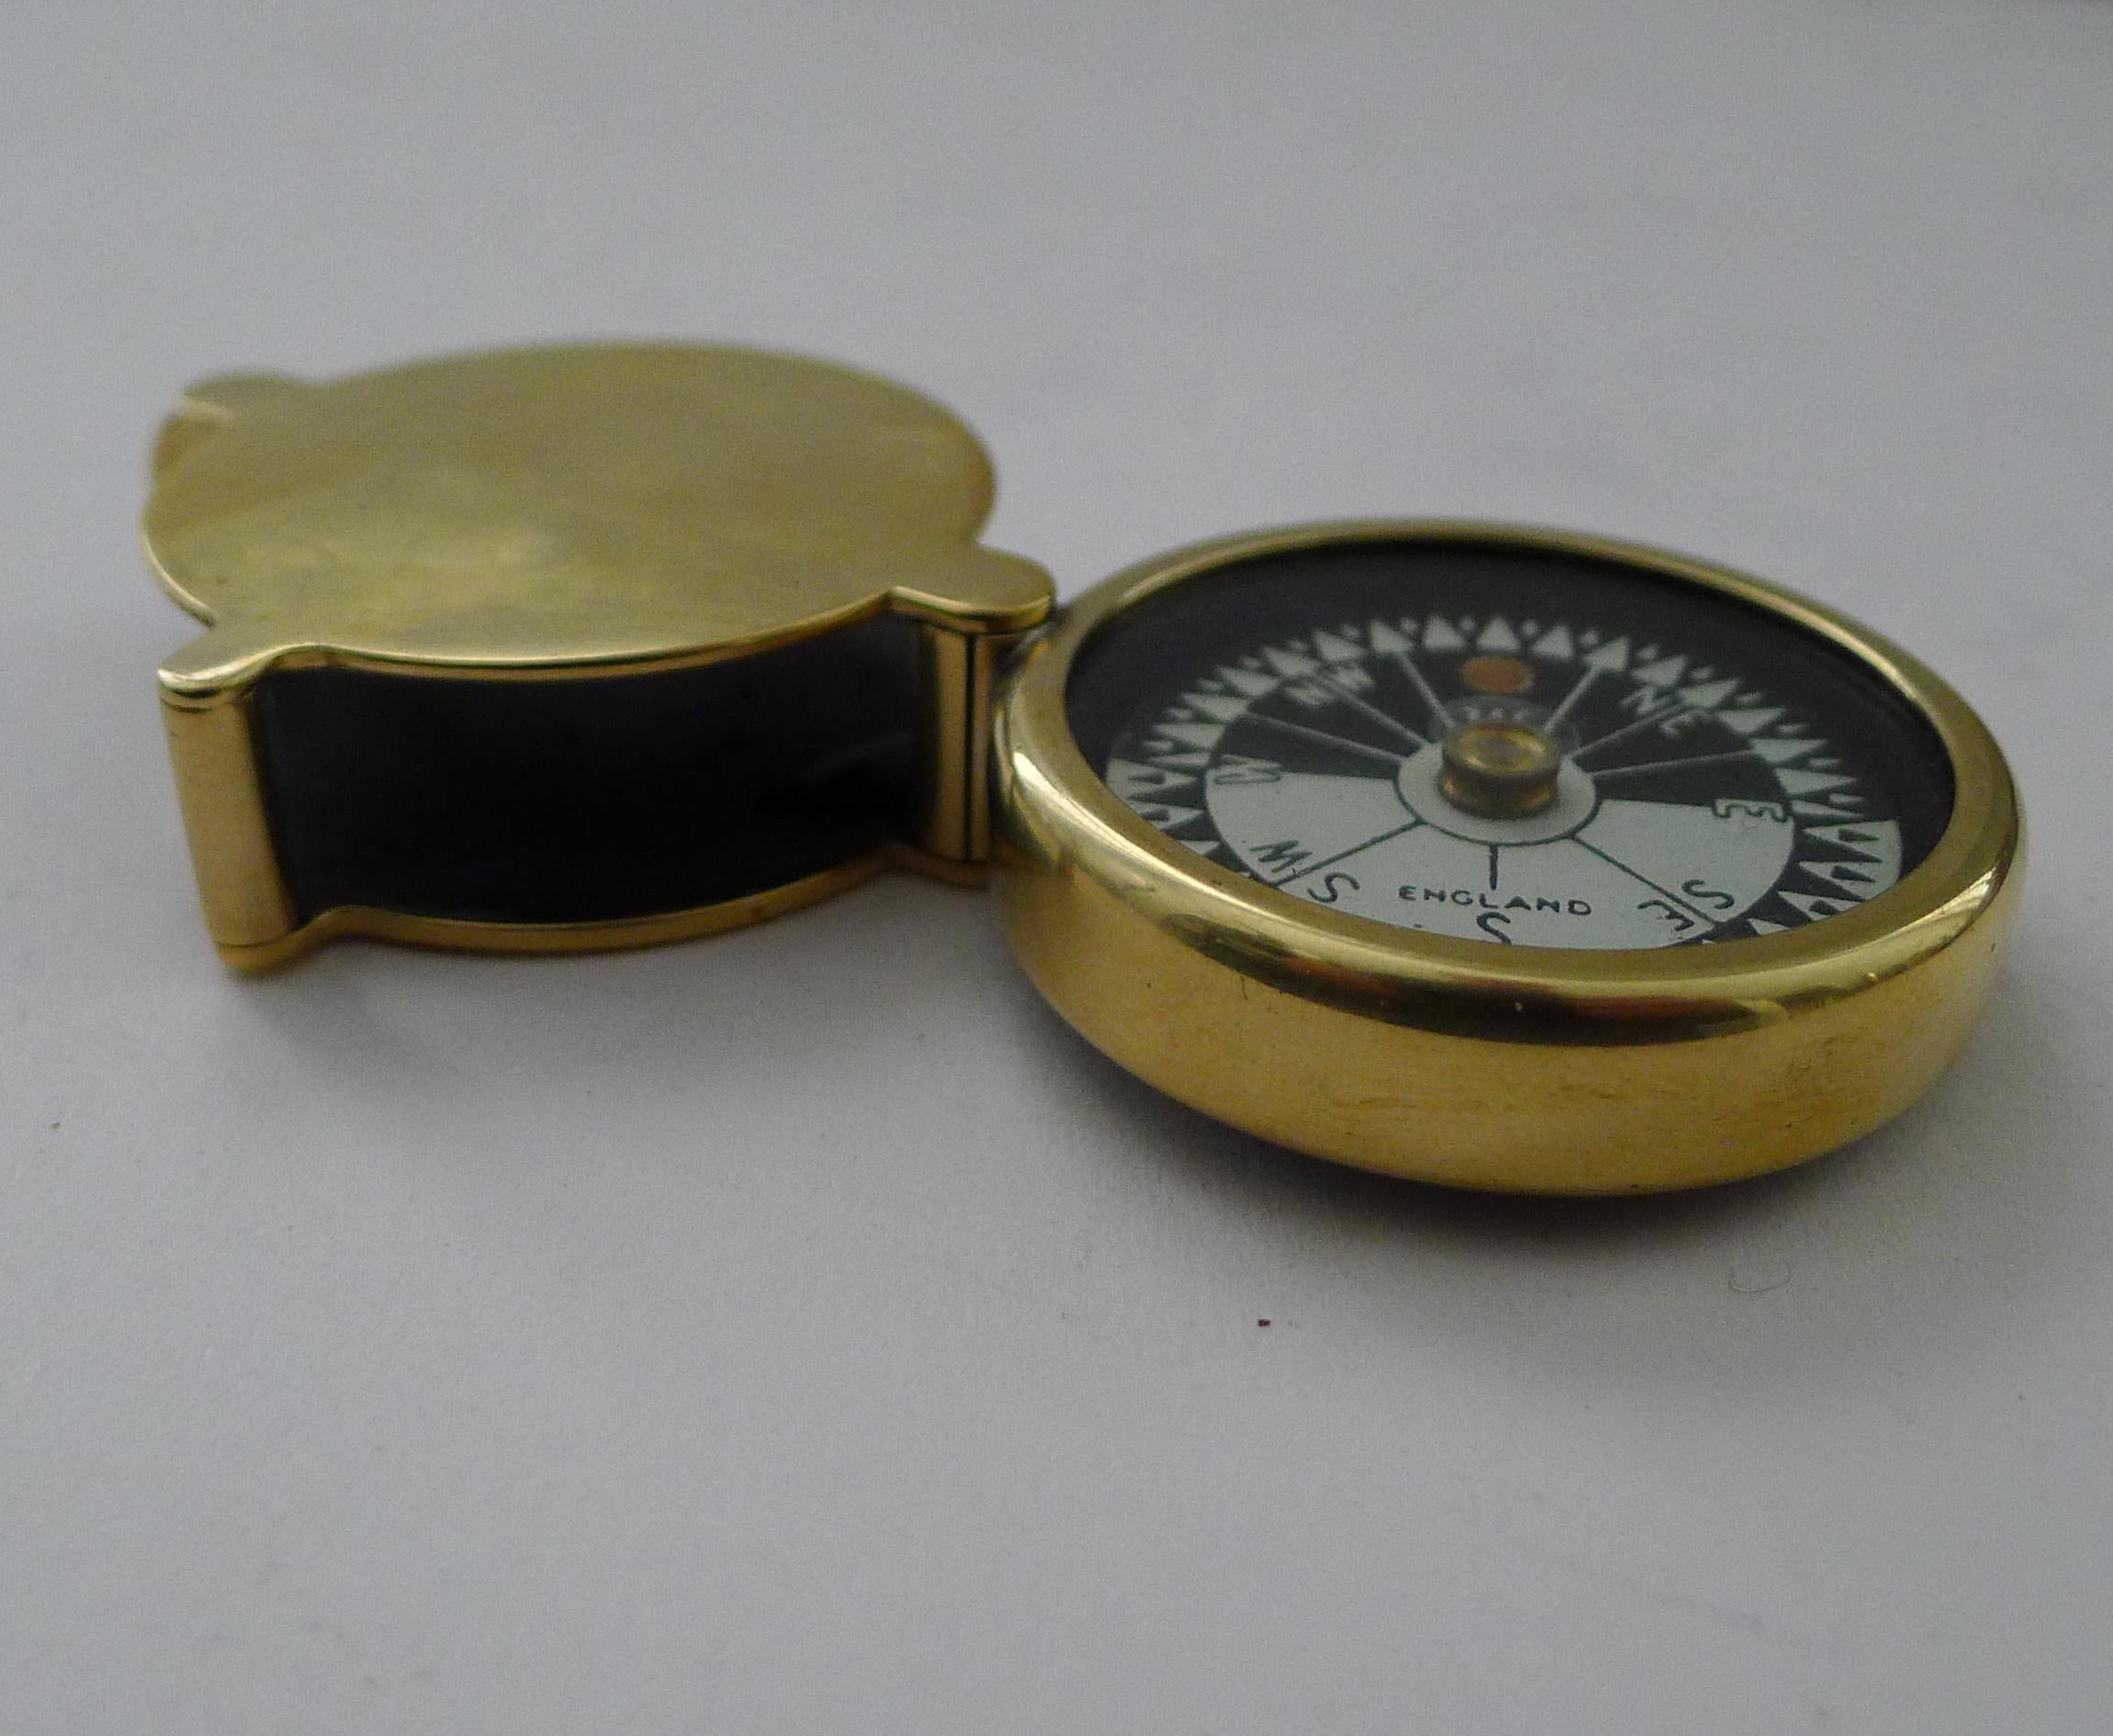 An unusual English compass which folds into it's own brass case.  Marked 